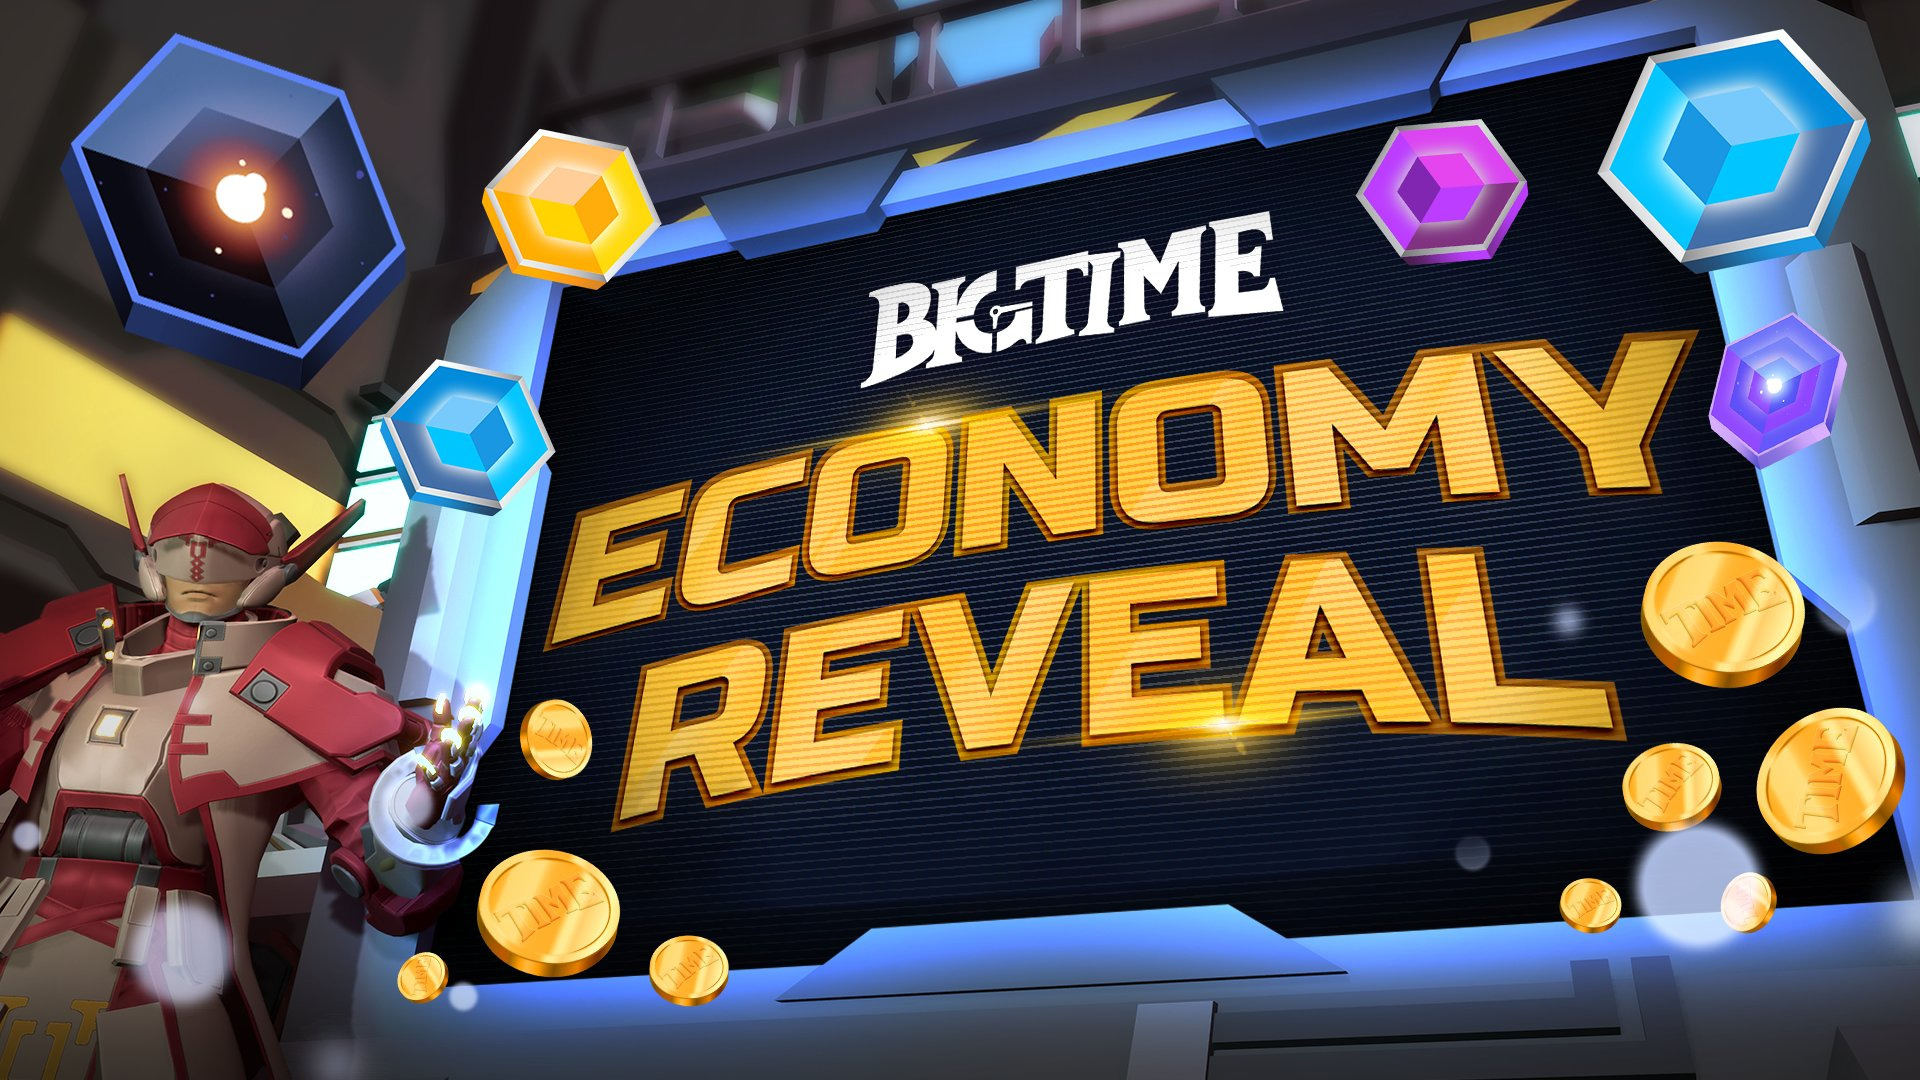 Big Time economy reveal banner